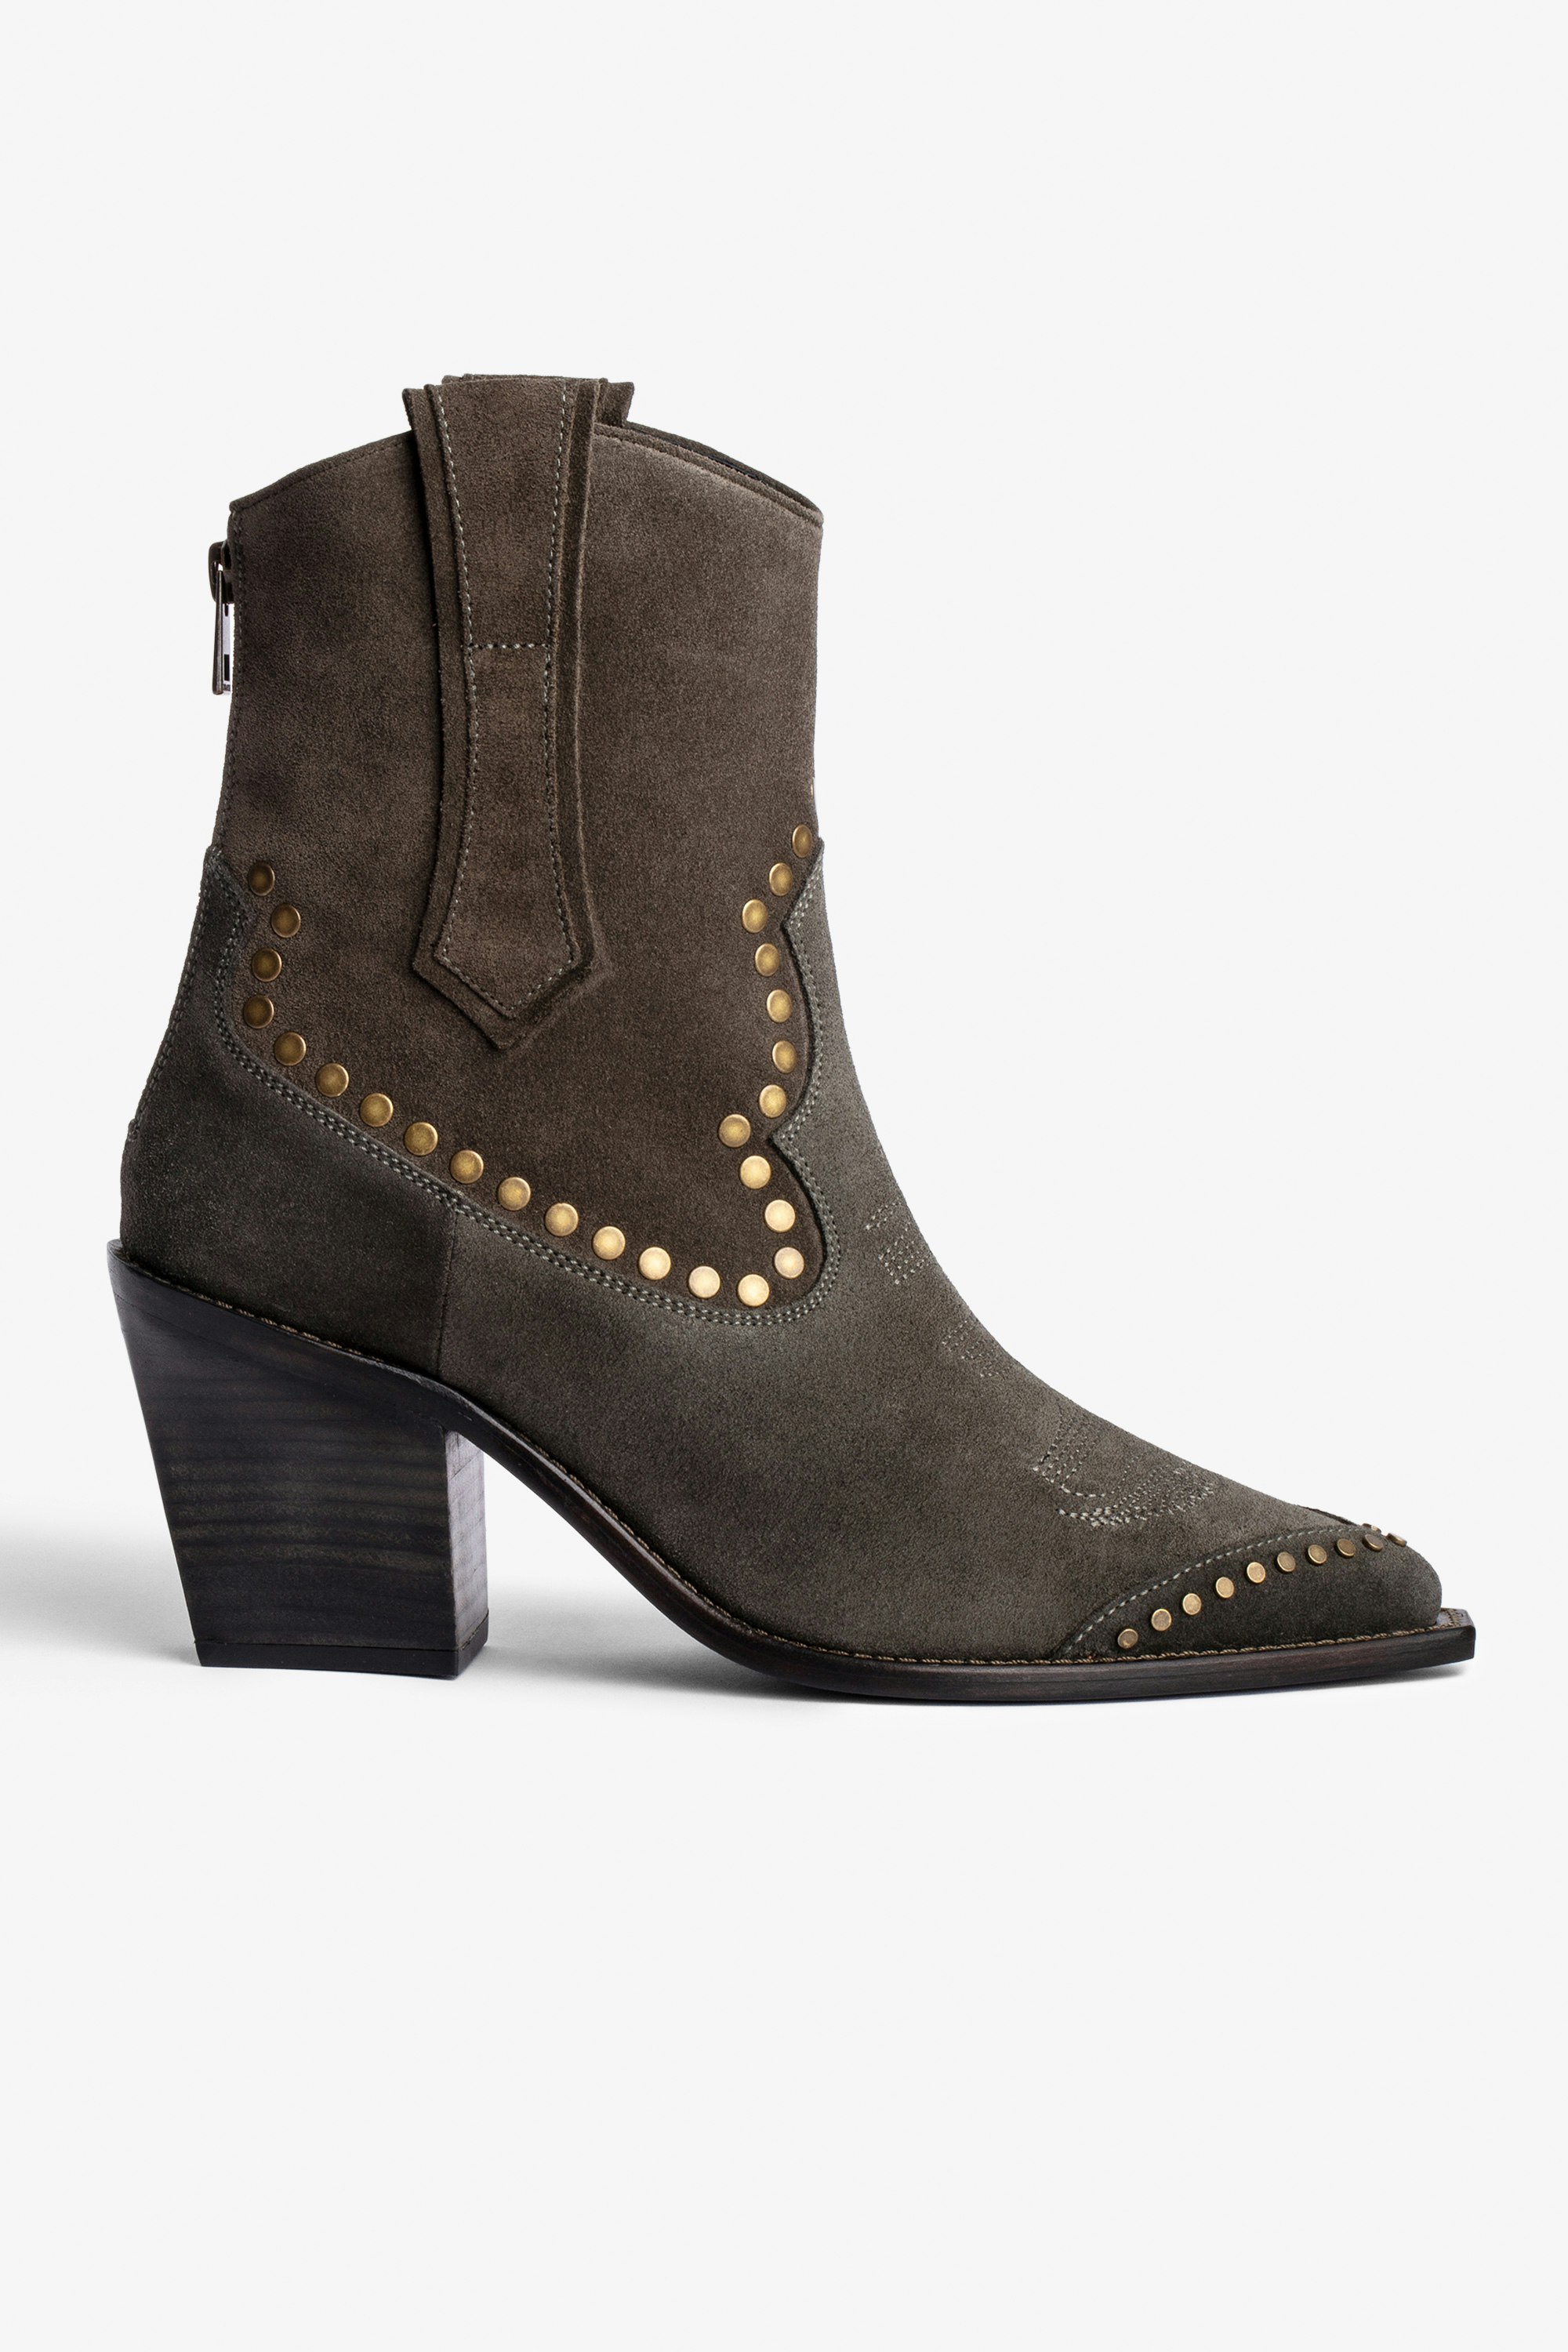 Cara High Boots Leather Women's khaki suede western ankle boots with gold studs. Buying this product, you support a responsible leather production through Leather Working Group.